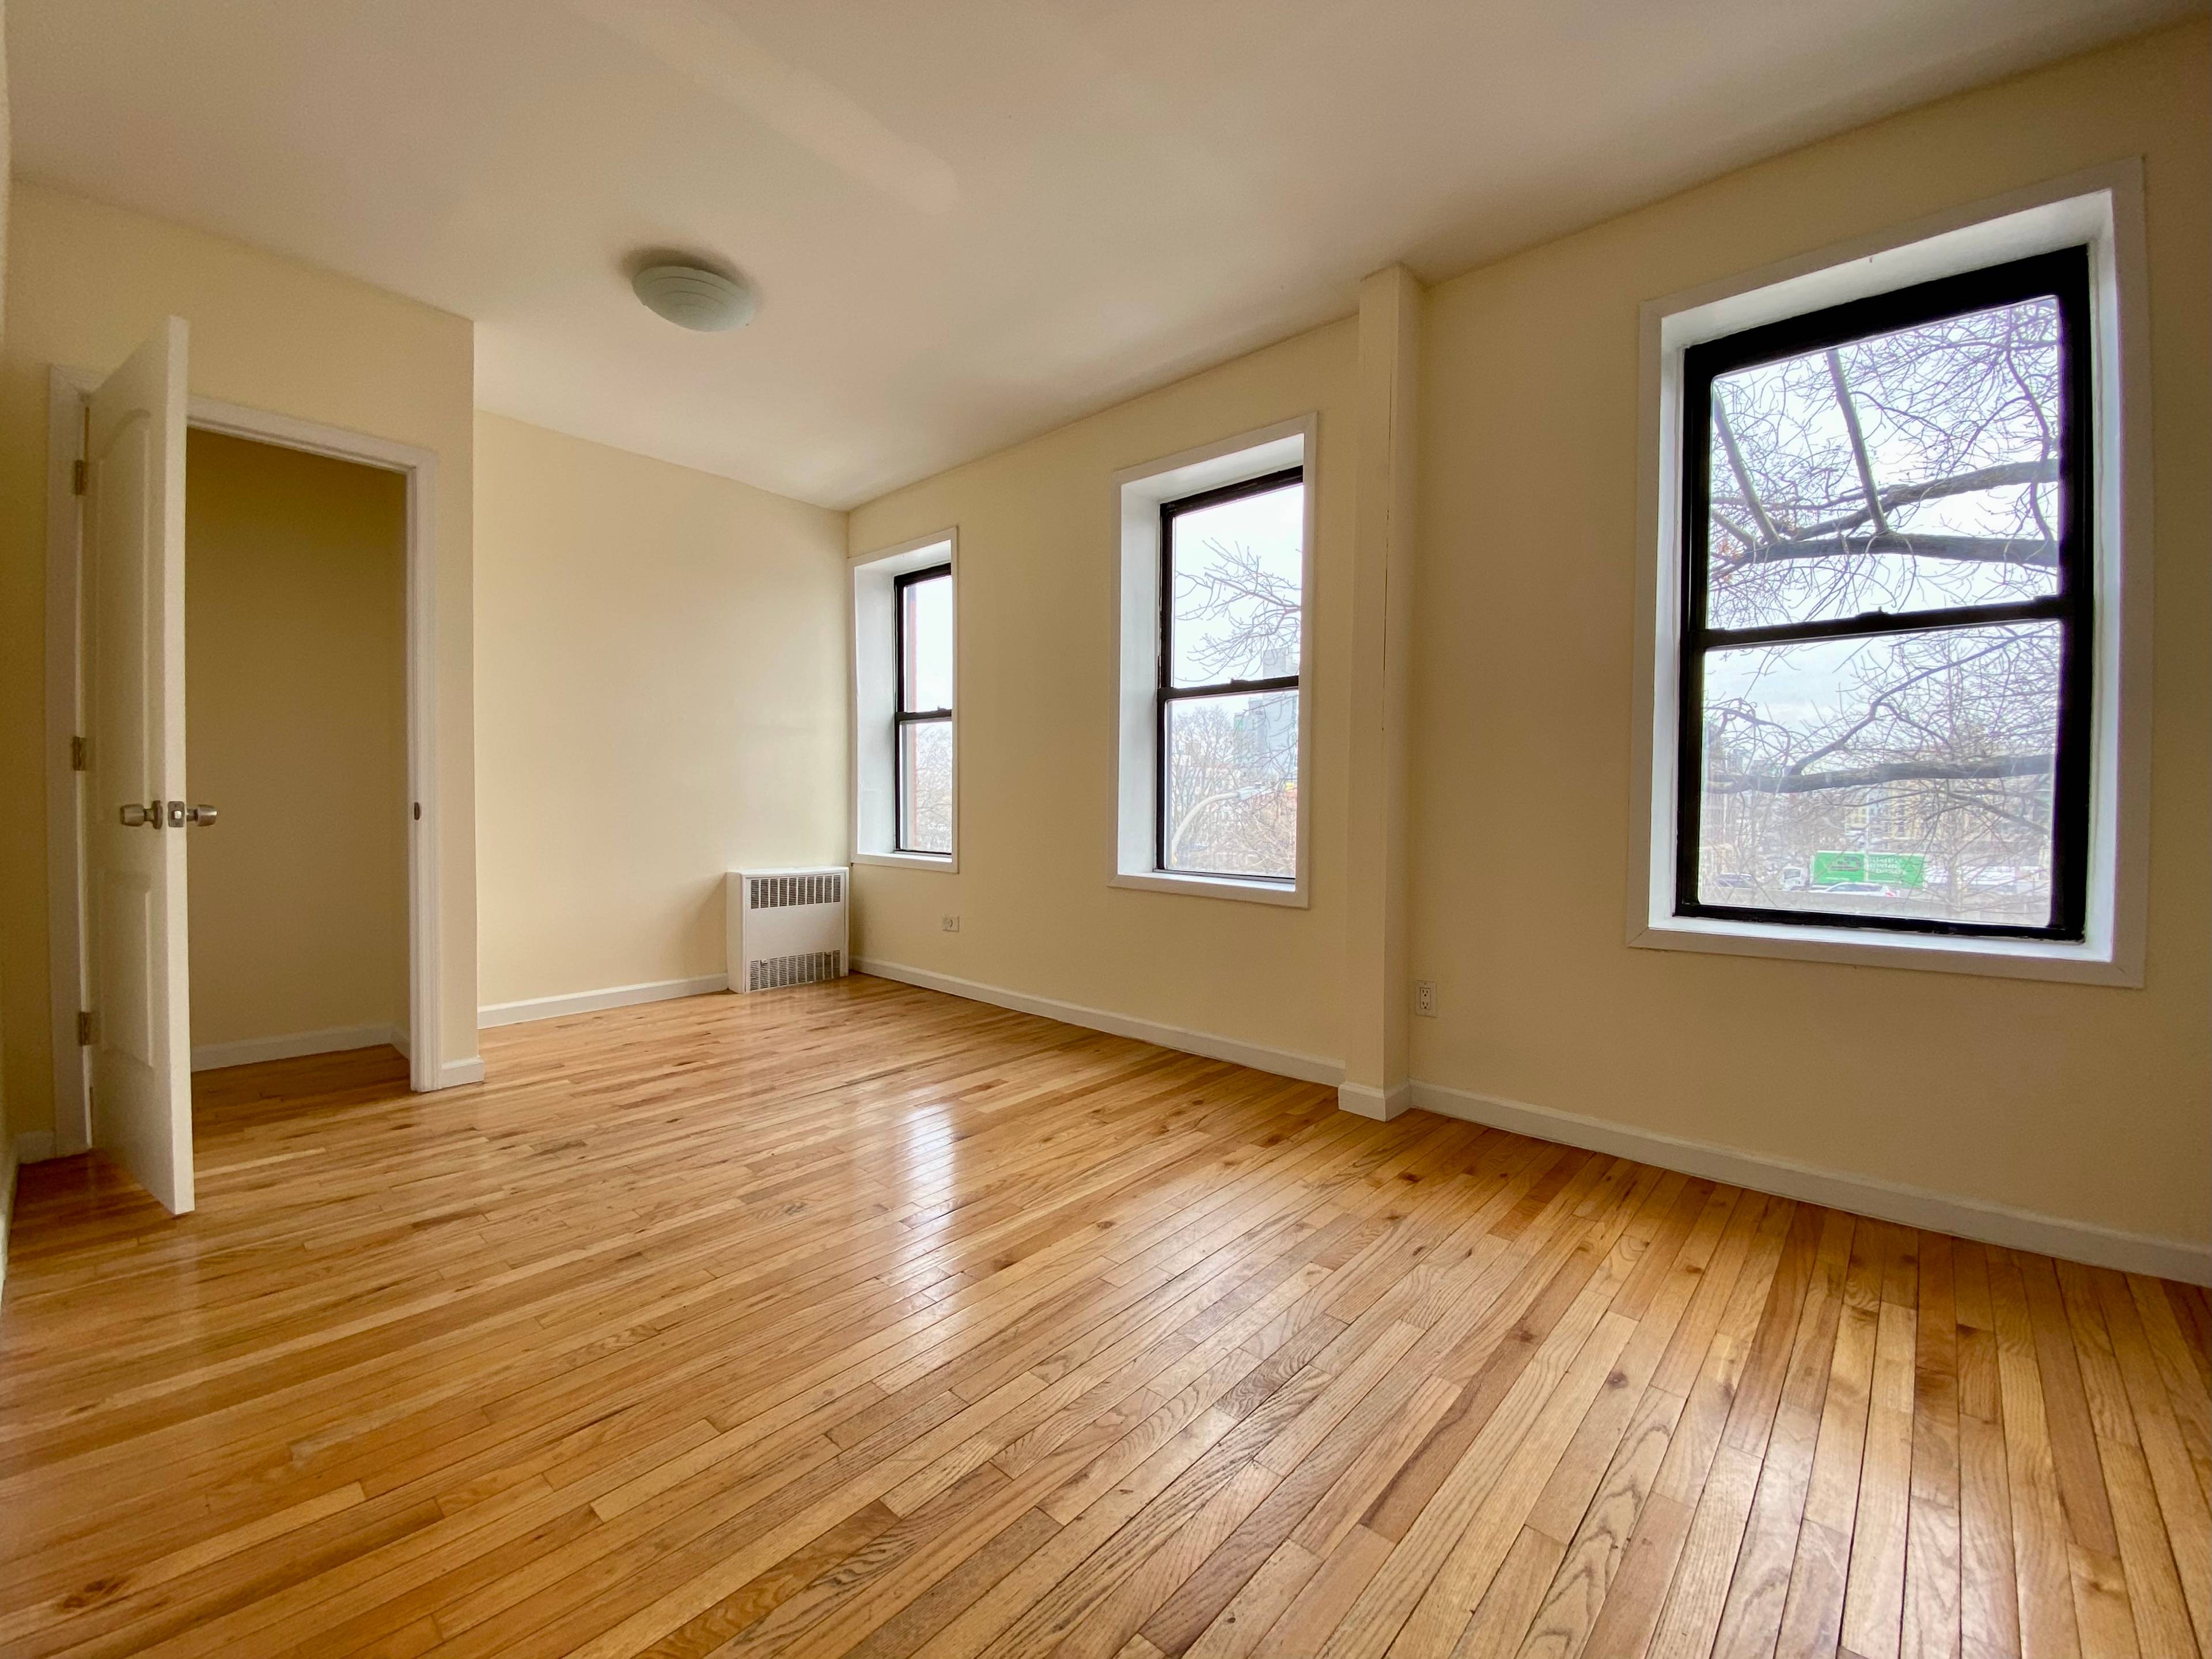 No Fee 3 Bedroom in Prime Williamsburg Fantastic, Large Apartment set in a great Location in Williamsburg, Brooklyn.